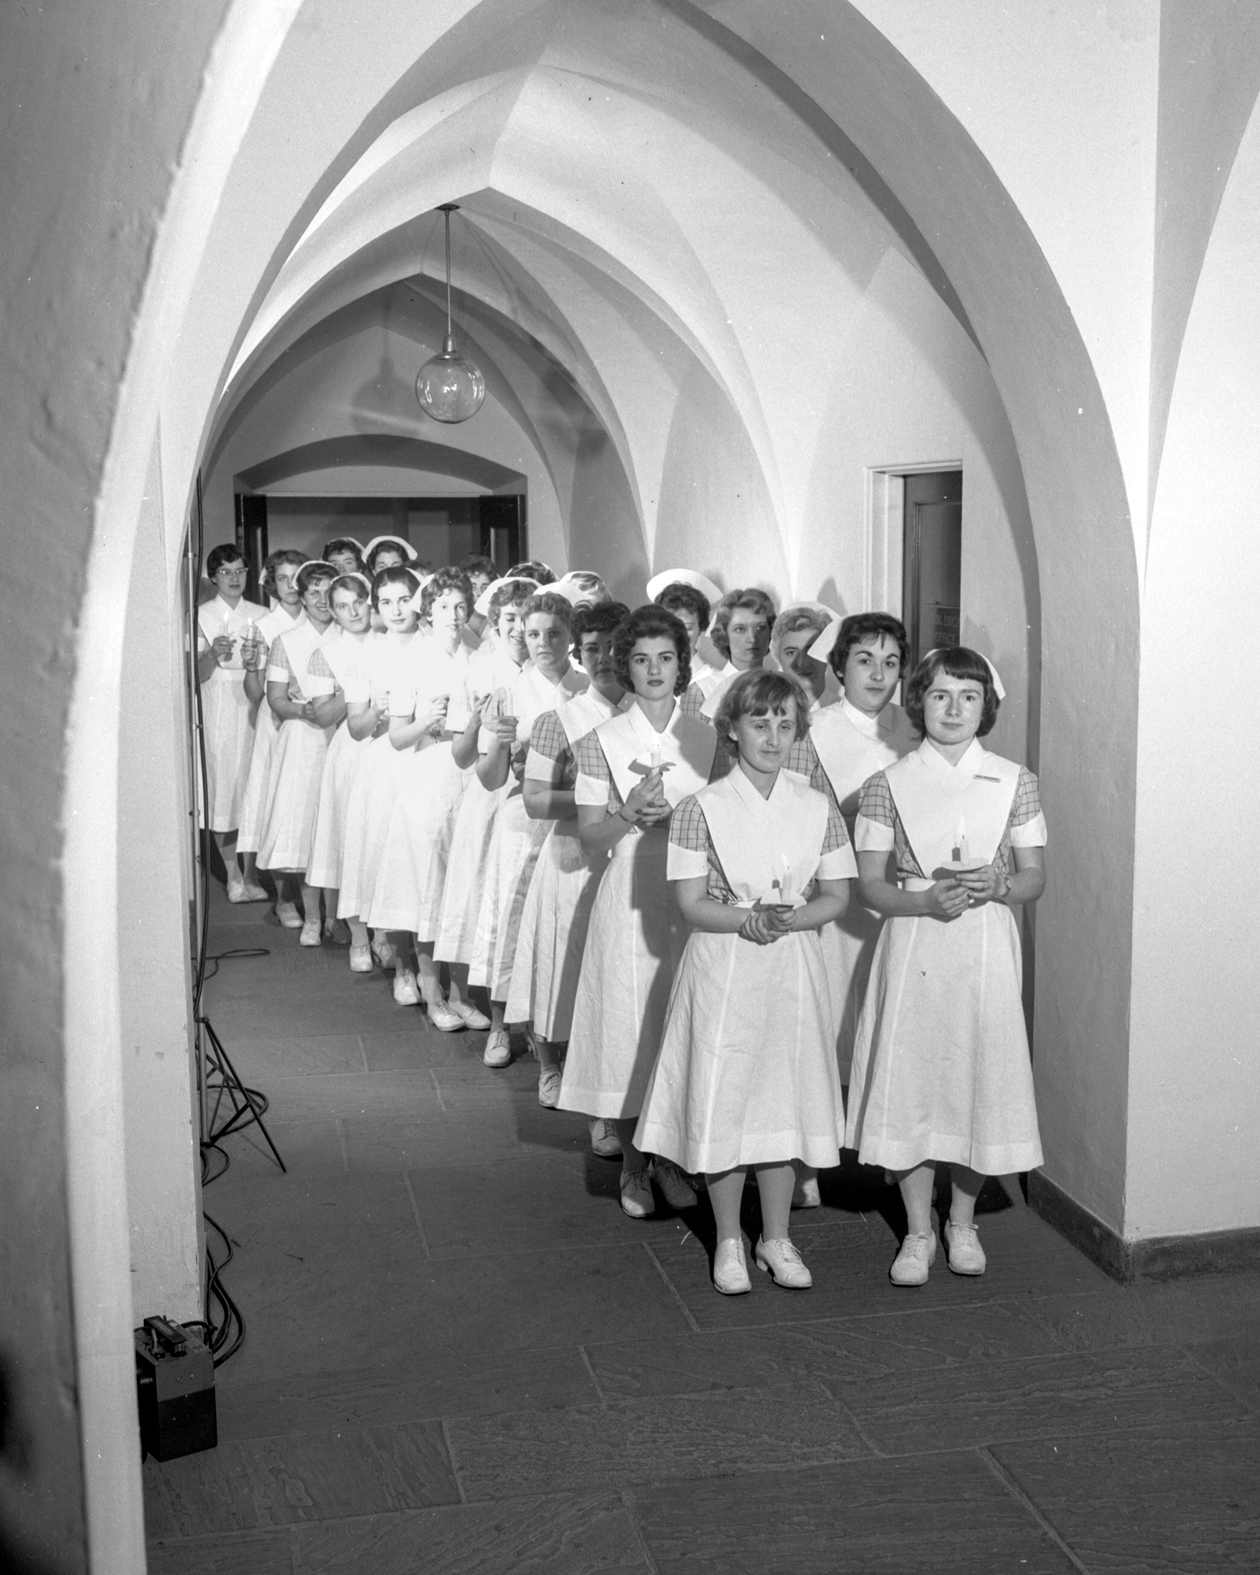 A candlelight service held in the nurses’ residence, 1960